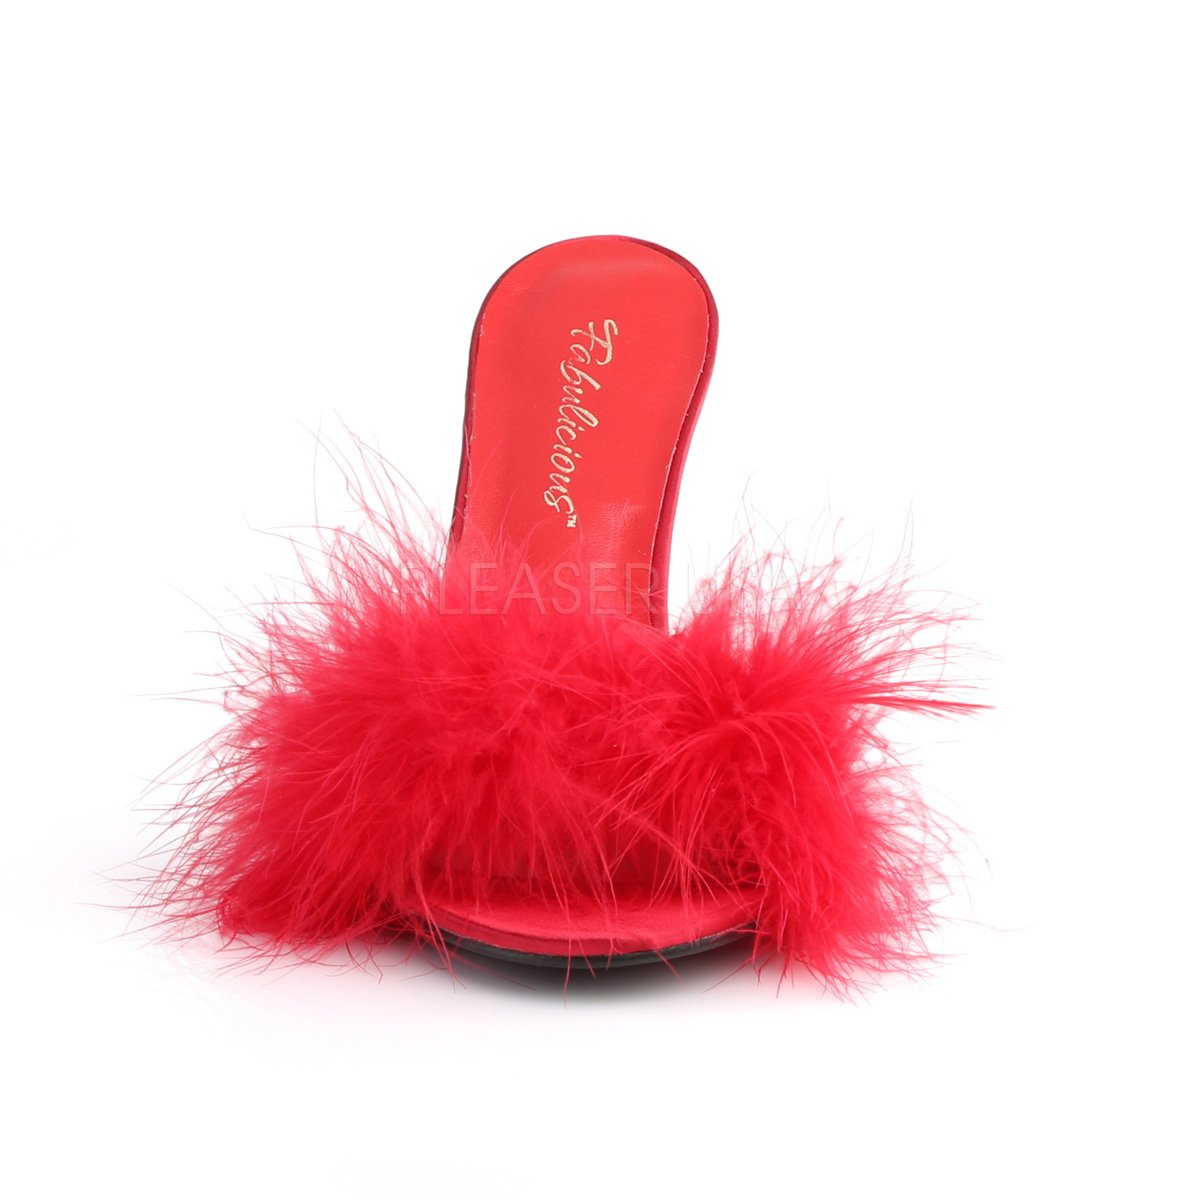 Marabou Feather Slipper with 4-inch Heel 4-colors – RedNeckWear